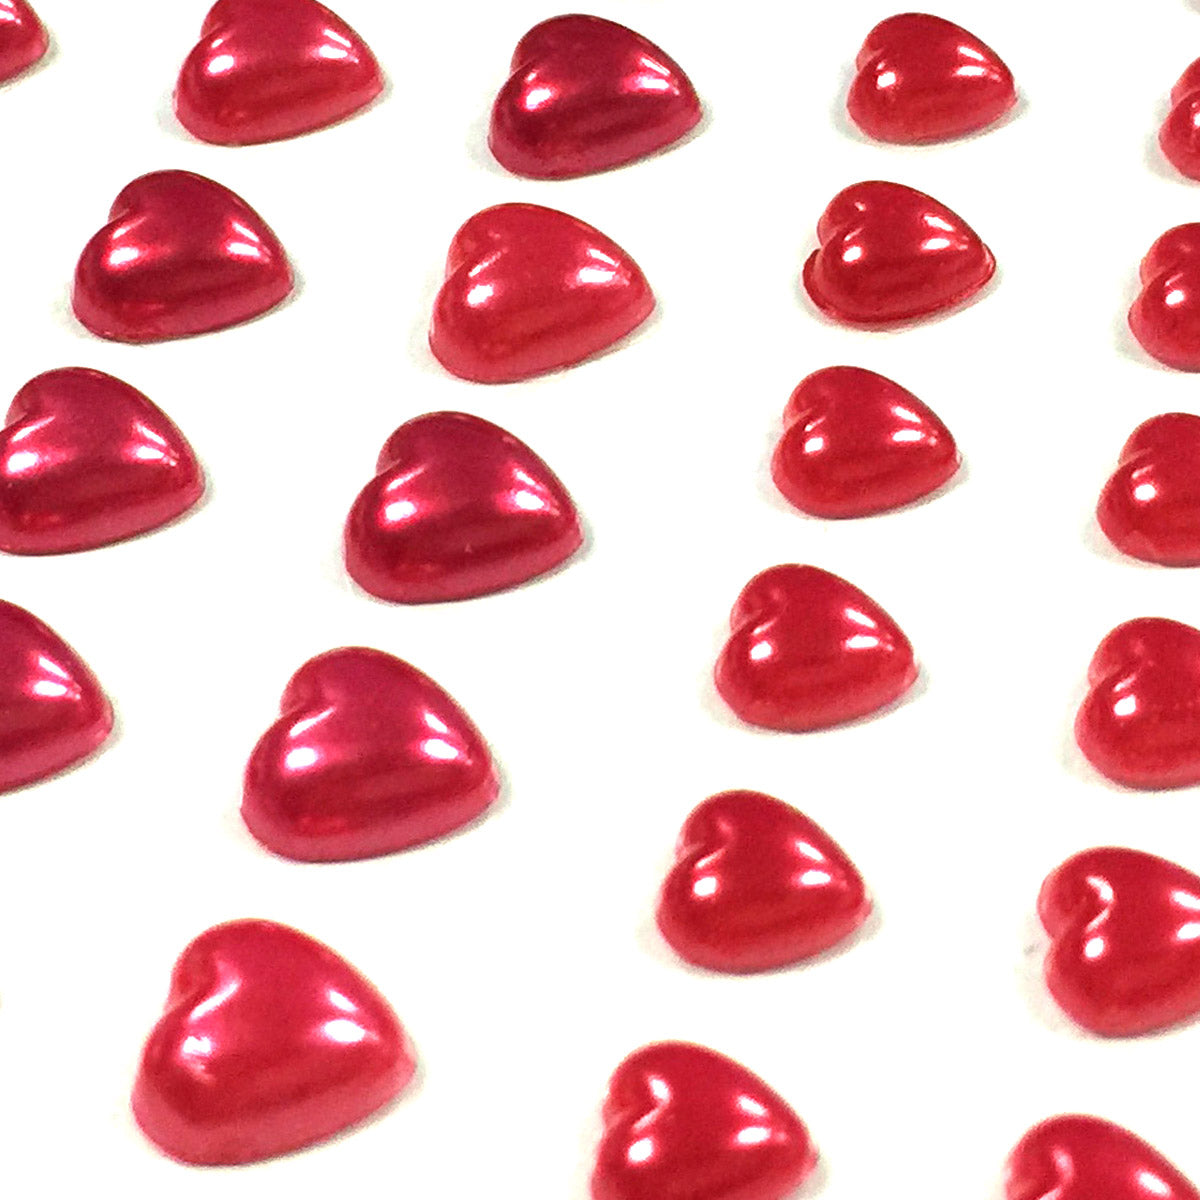 Wrapables 84 Piece Acrylic Adhesive Heart Gems